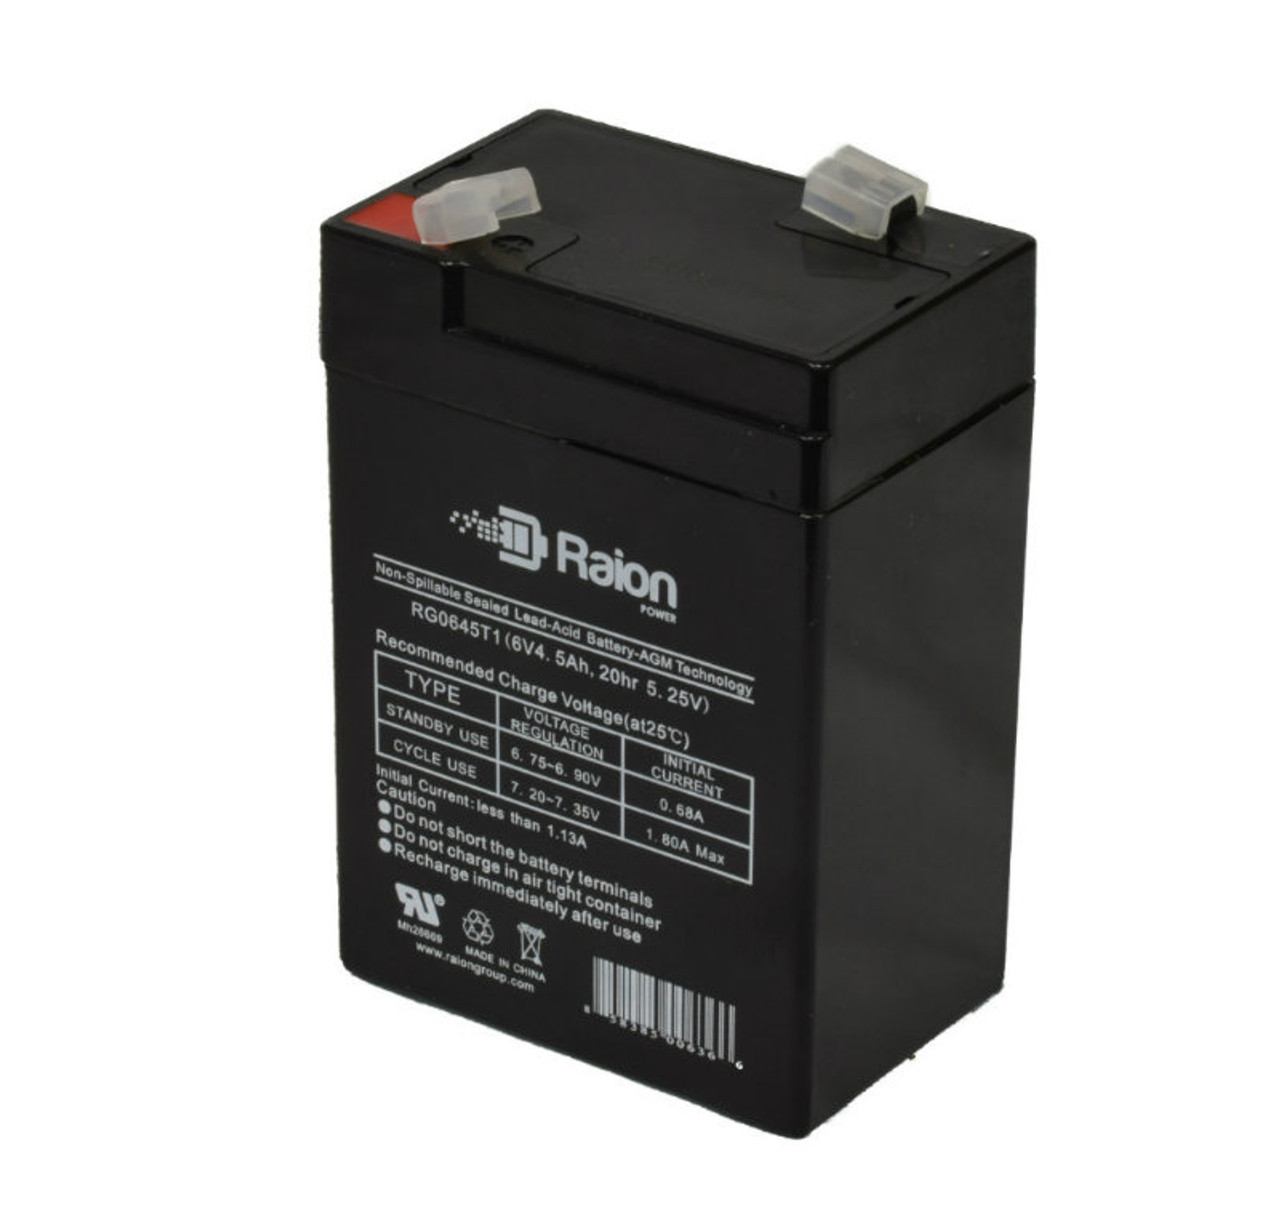 Raion Power RG0645T1 6V 4.5Ah Replacement Battery Cartridge for Leoch DJW6-4.0